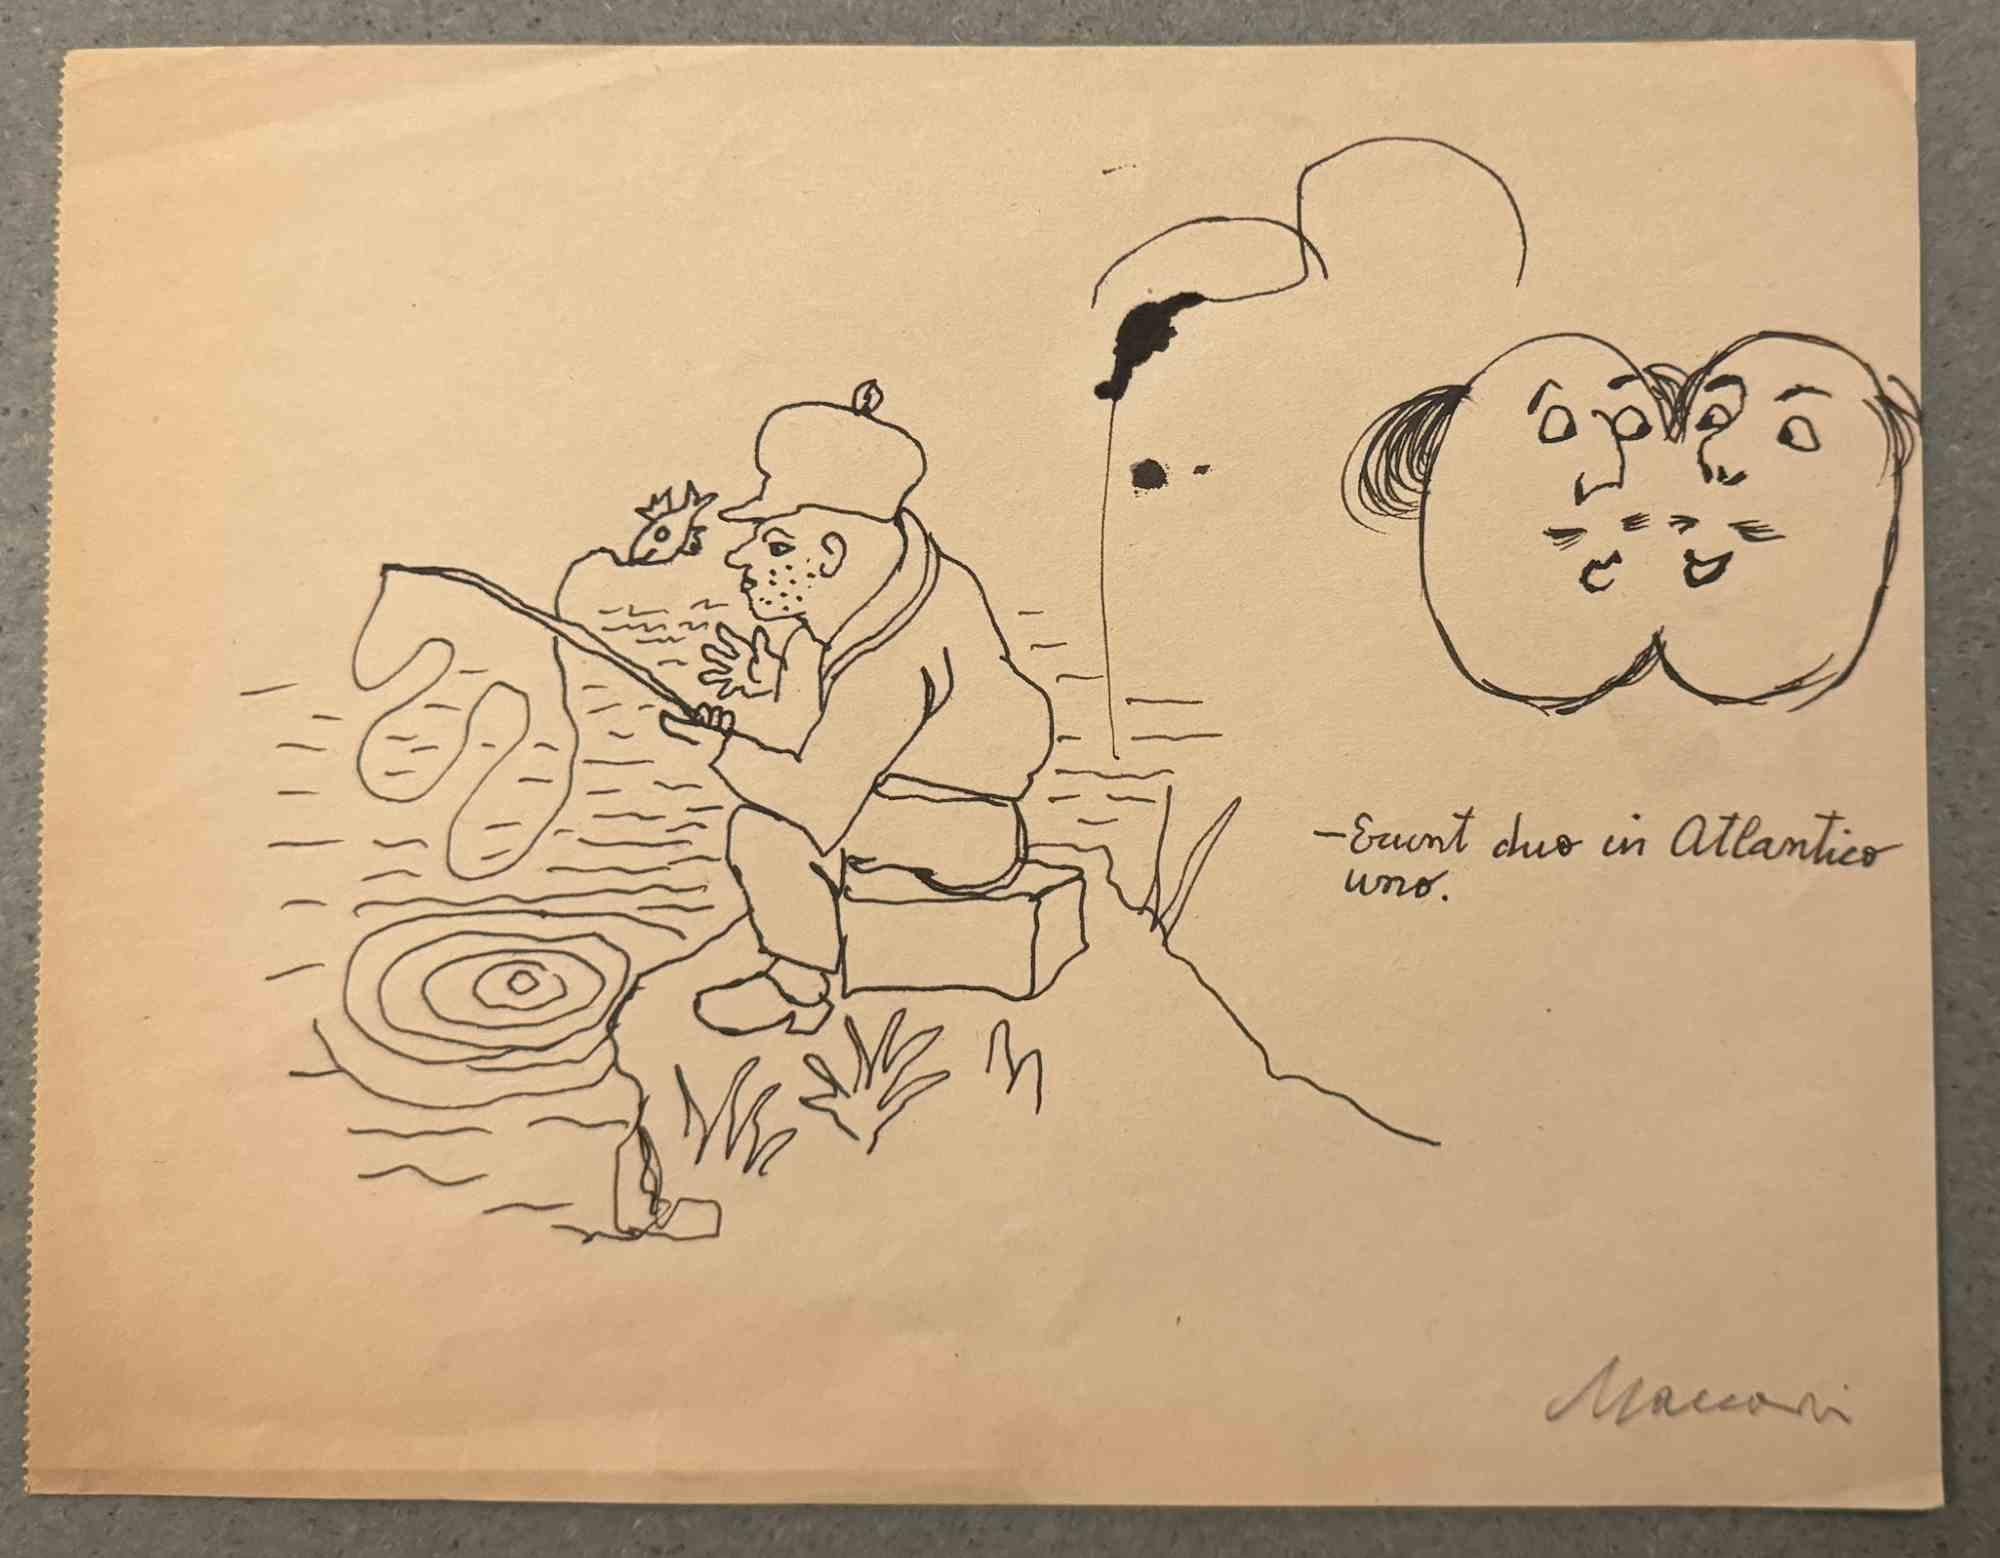 Fishing is a china ink drawing realized by Mino Maccari  (1924-1989) in the Mid-20th Century.

Hand-signed.

Good conditions with slight foxing.

Mino Maccari (Siena, 1924-Rome, June 16, 1989) was an Italian writer, painter, engraver and journalist,